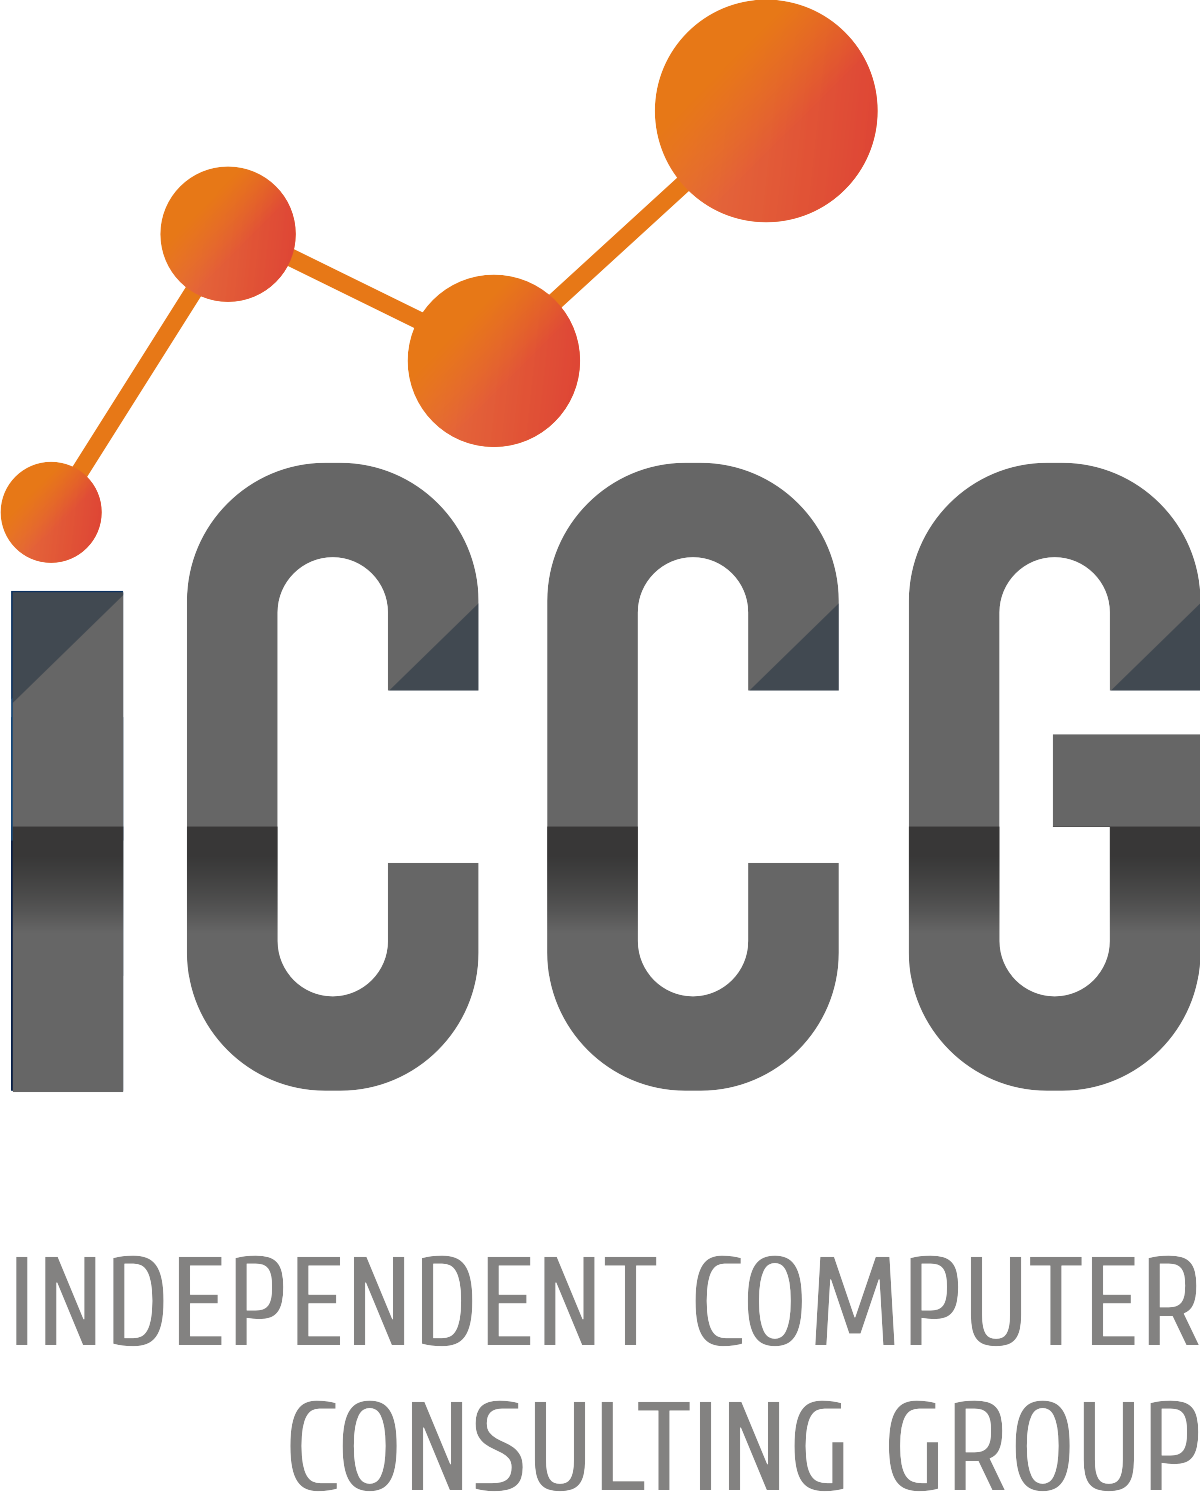 ICCG Delivers for Fashion & Textile Businesses, Last Mile Functionality Completing a Major Implementation of Infor M3 ERP Software for RSWM Ltd. – an LNJ Enterprise